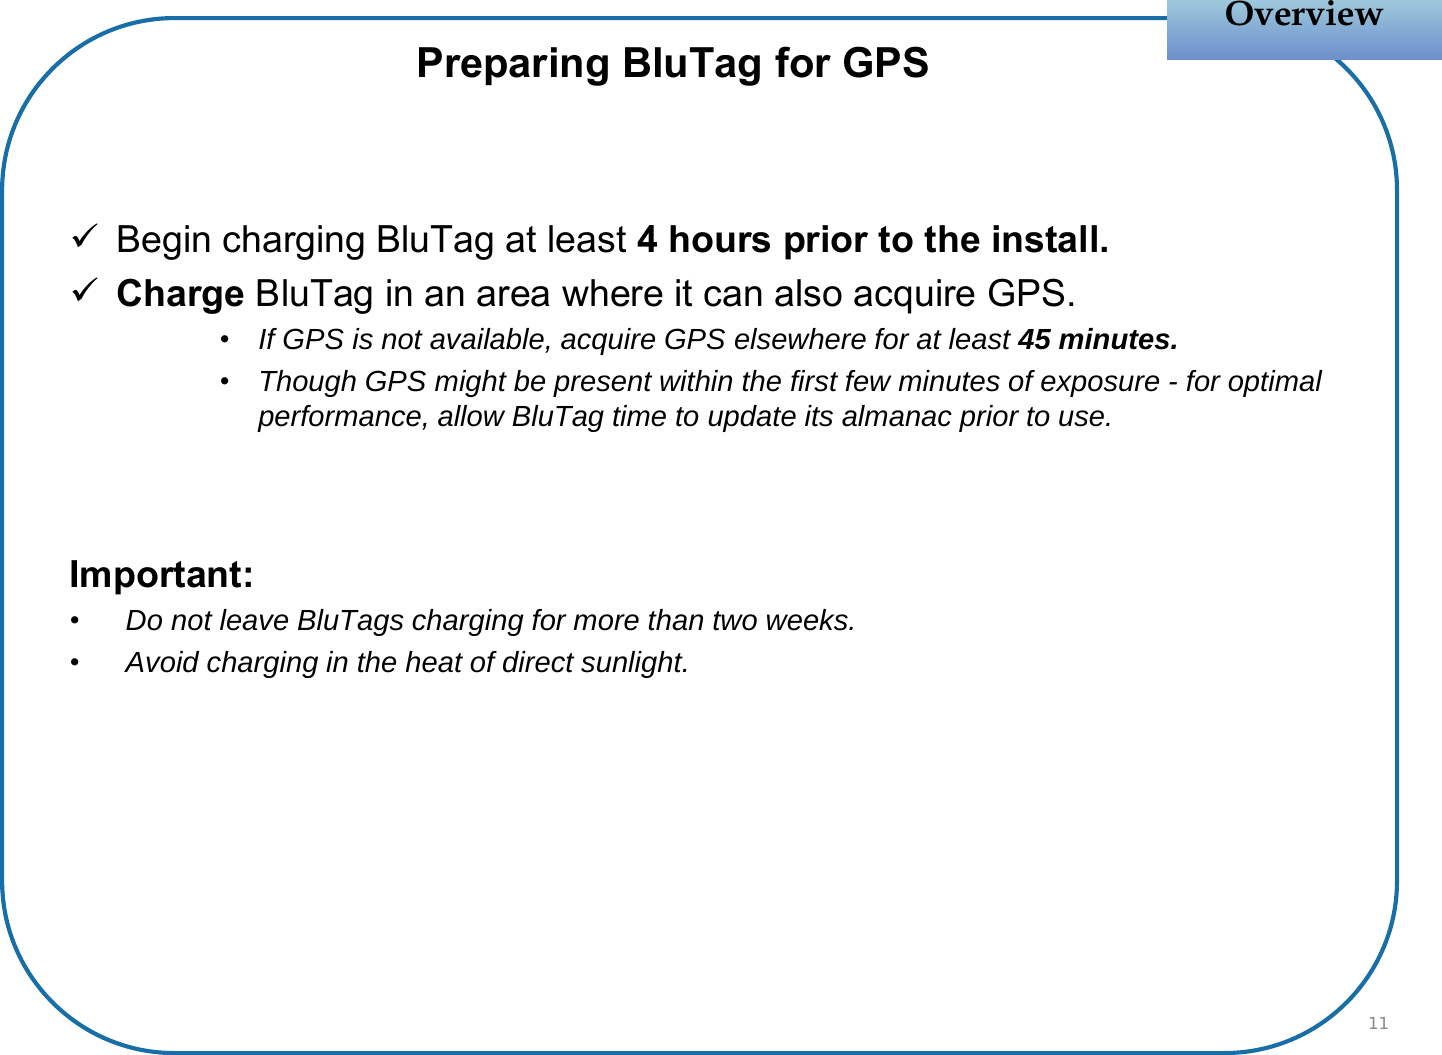 Begin charging BluTag at least 4 hours prior to the install.Charge BluTag in an area where it can also acquire GPS.•If GPS is not available, acquire GPS elsewhere for at least 45 minutes.•Though GPS might be present within the first few minutes of exposure - for optimal performance, allow BluTag time to update its almanac prior to use.Important:•Do not leave BluTags charging for more than two weeks.•Avoid charging in the heat of direct sunlight.OverviewOverviewPreparing BluTag for GPS11